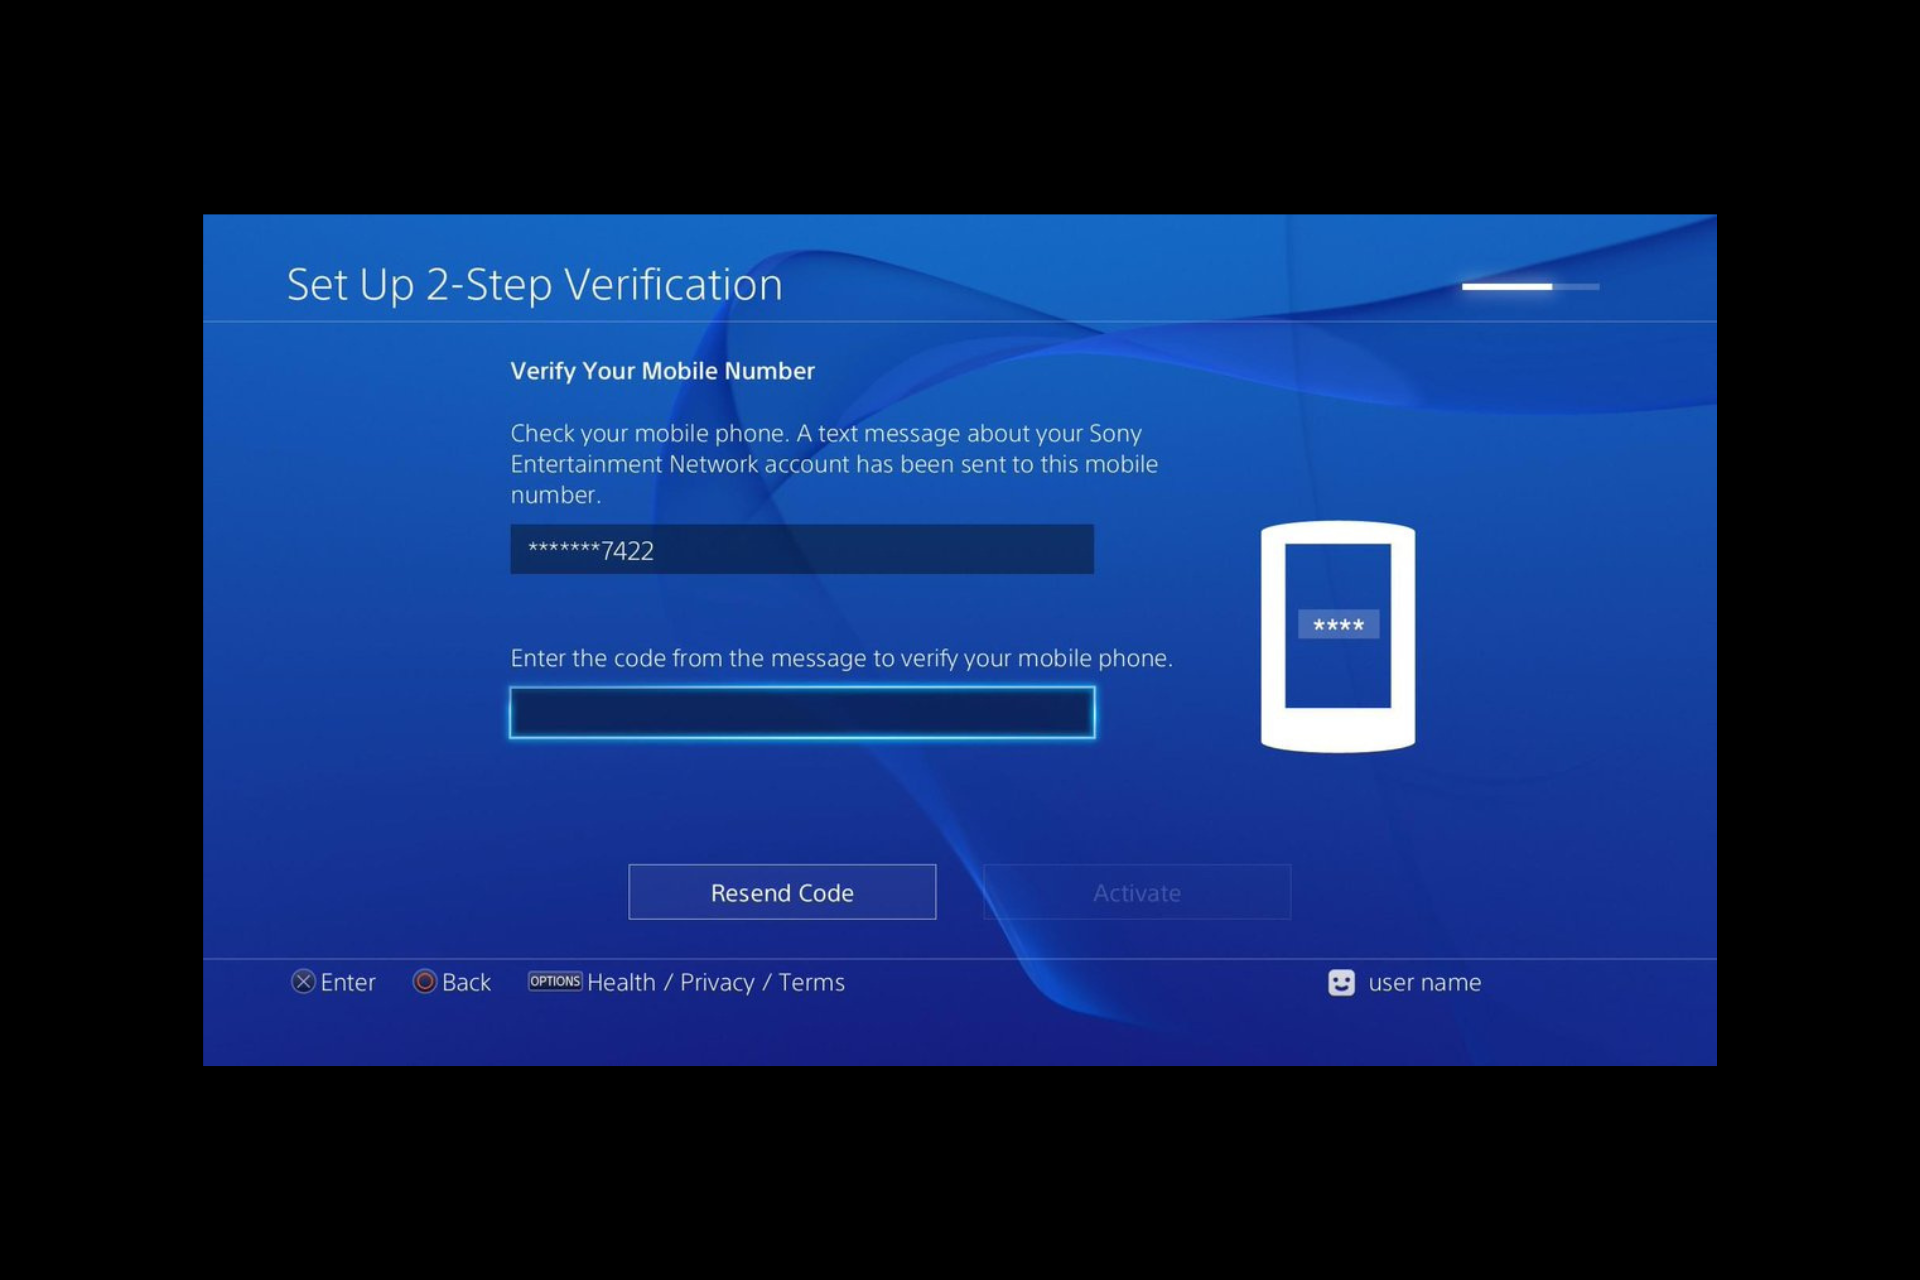 PlayStation is Not Sending a Verification Code